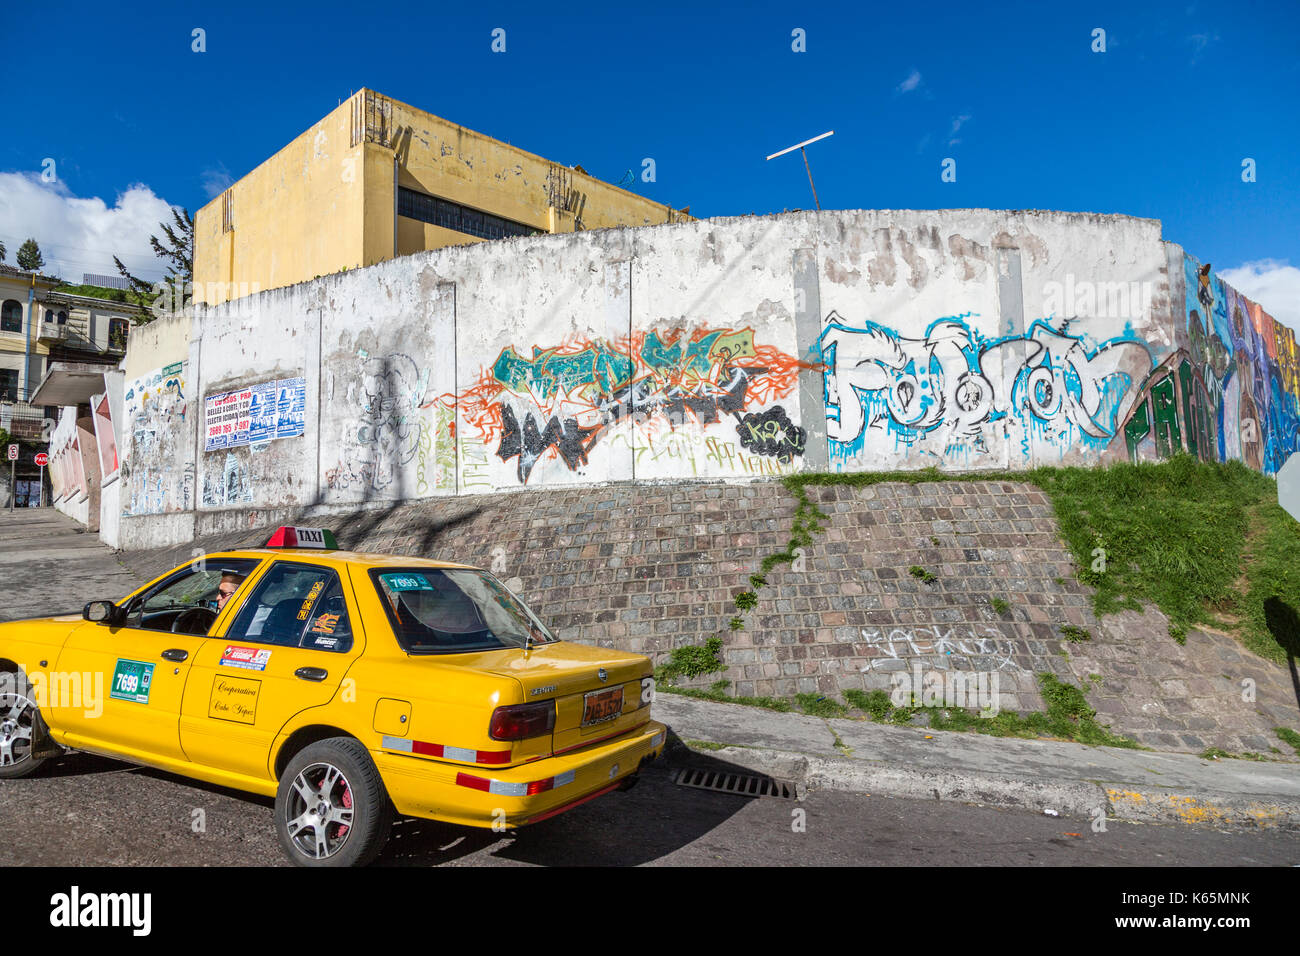 Yellow taxi cab and roadside urban art and grafitti on a wall in the suburbs of Quito, capital city of Ecuador, South America, a typical street scene Stock Photo